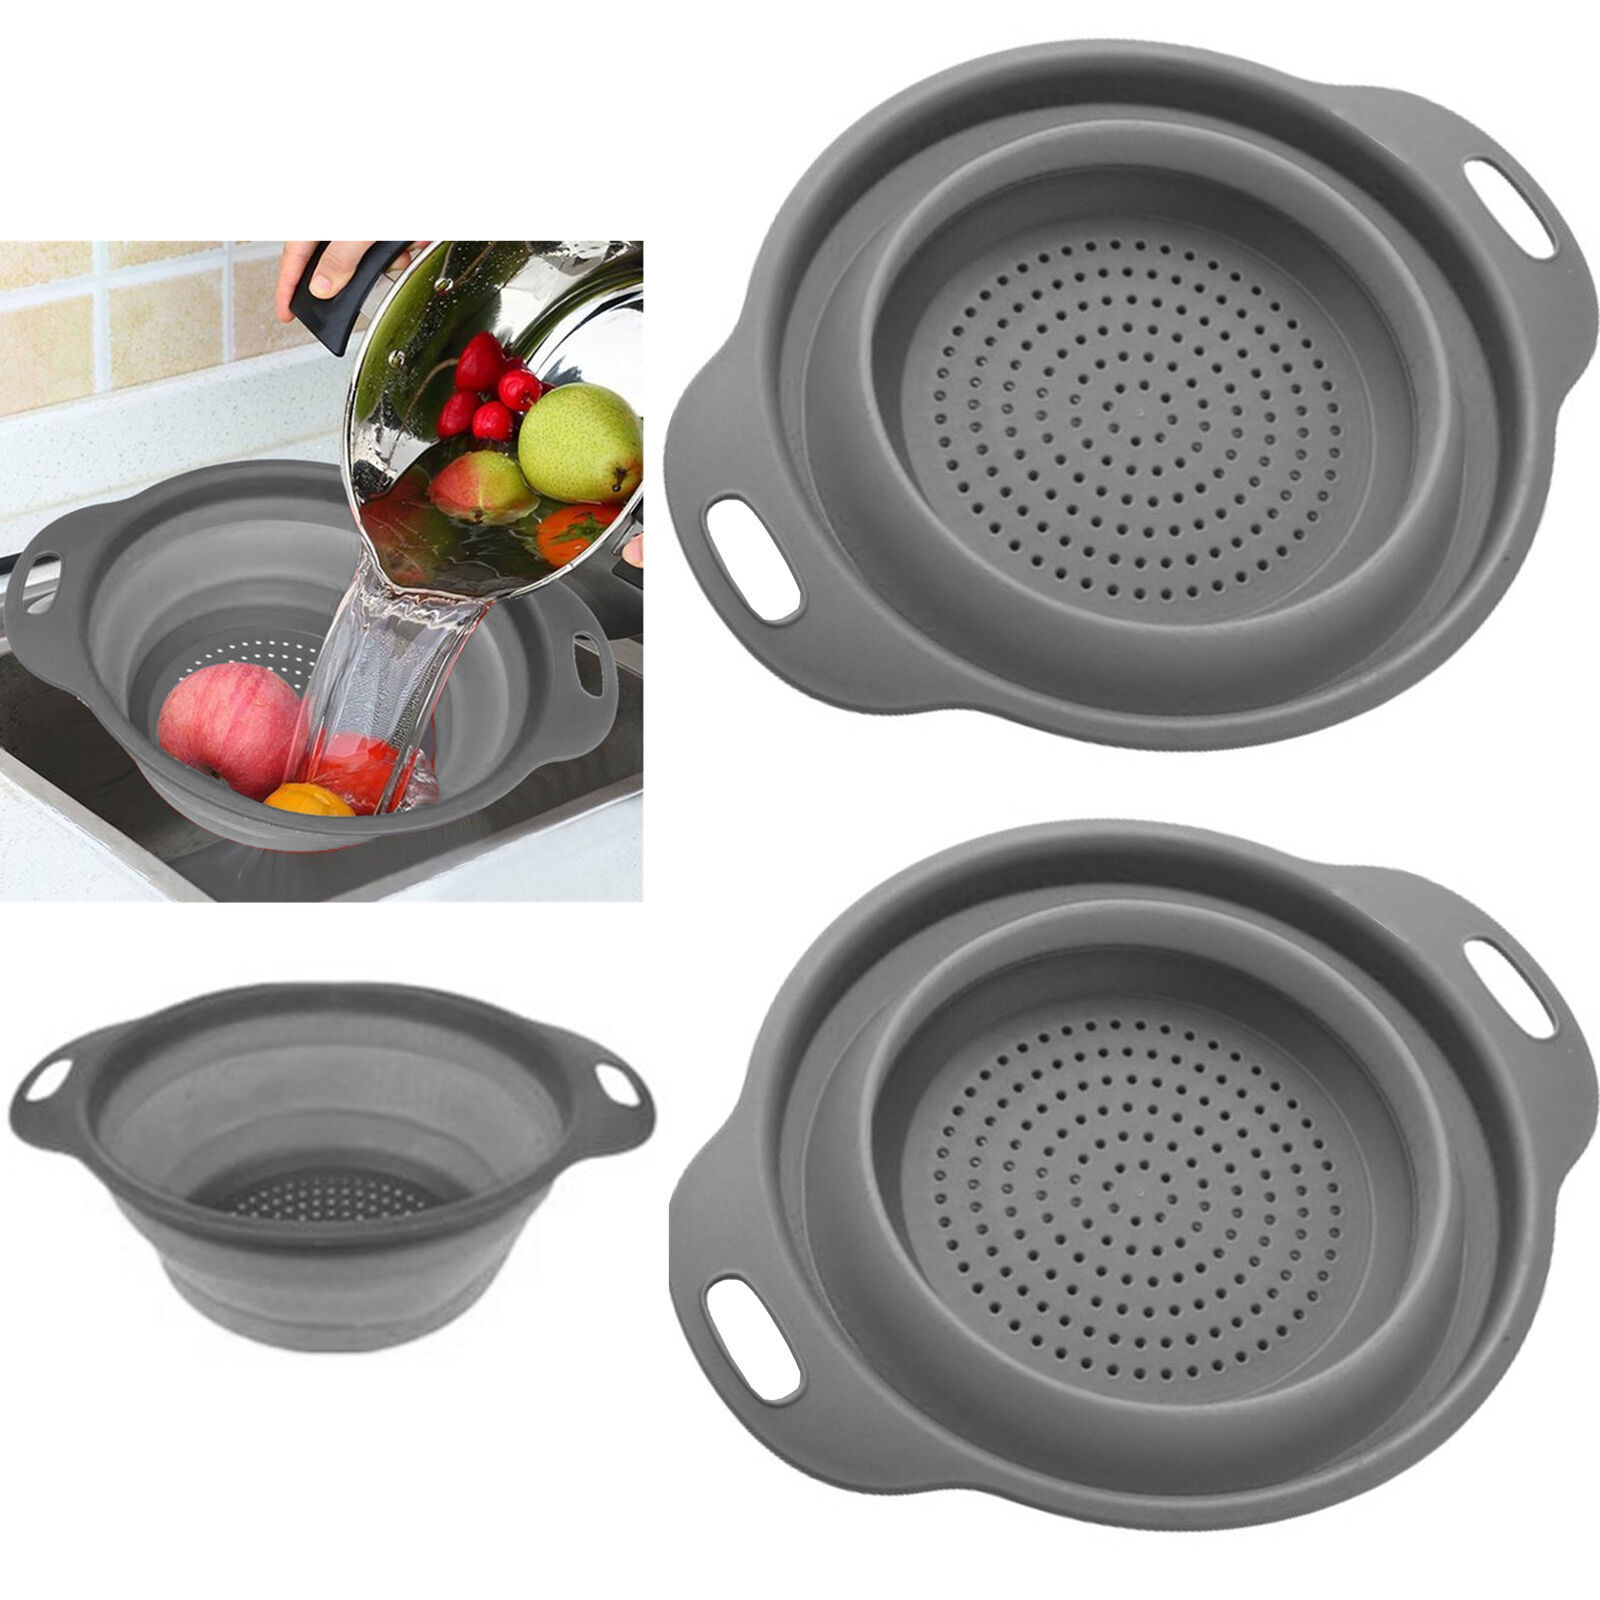 Primary image for 2 X Silicone Collapsible Bowl Strainer Colander Foldable Drainer 11.8" Kitchen